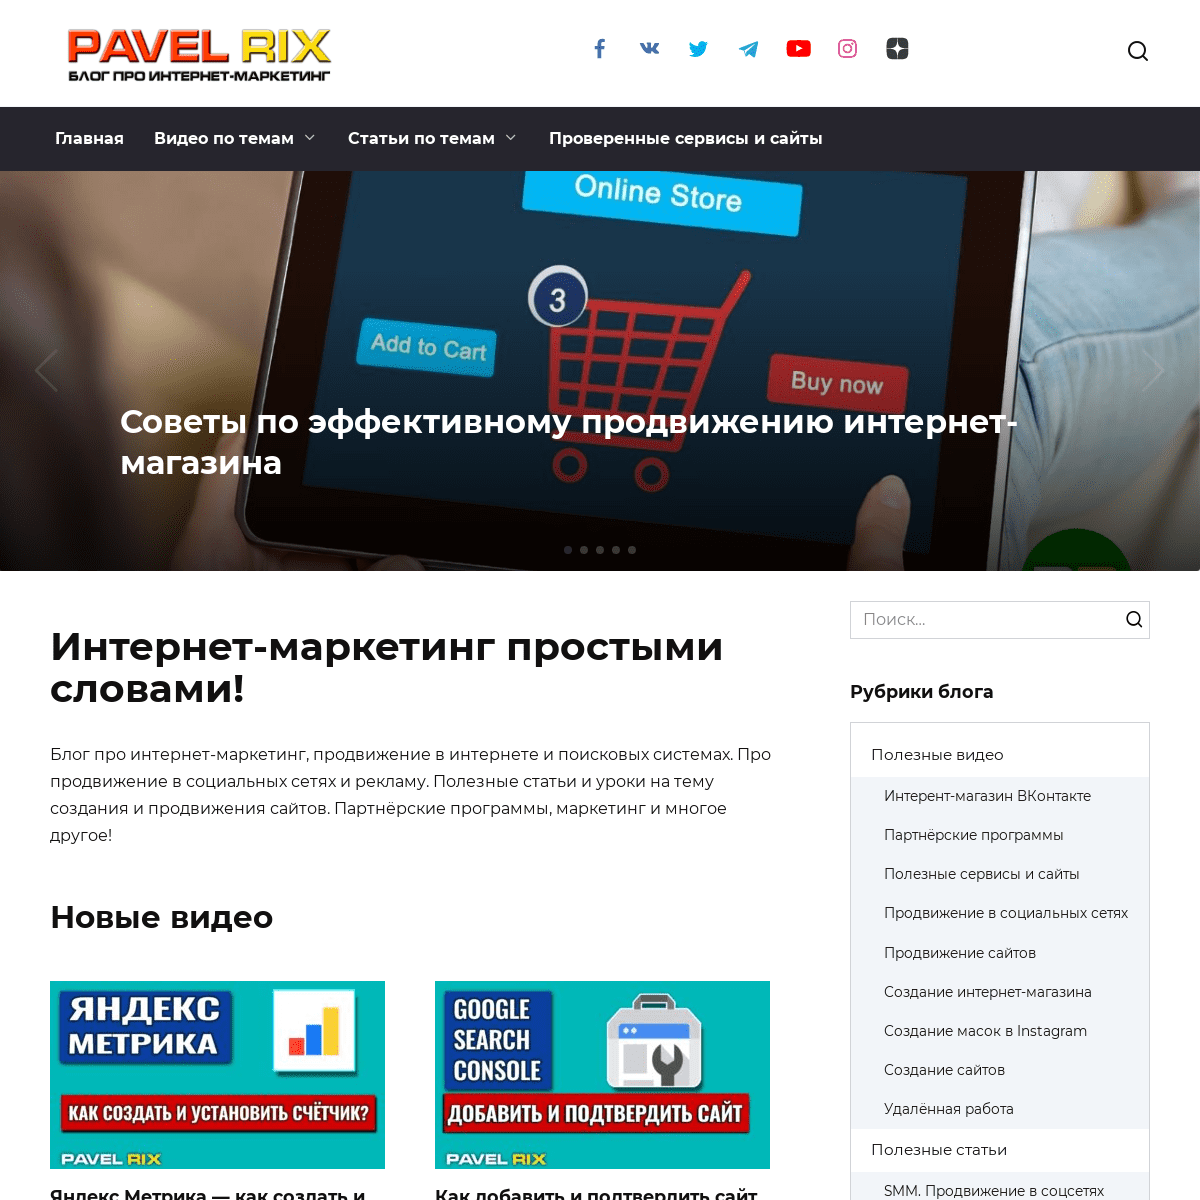 A complete backup of https://pavelrix.ru